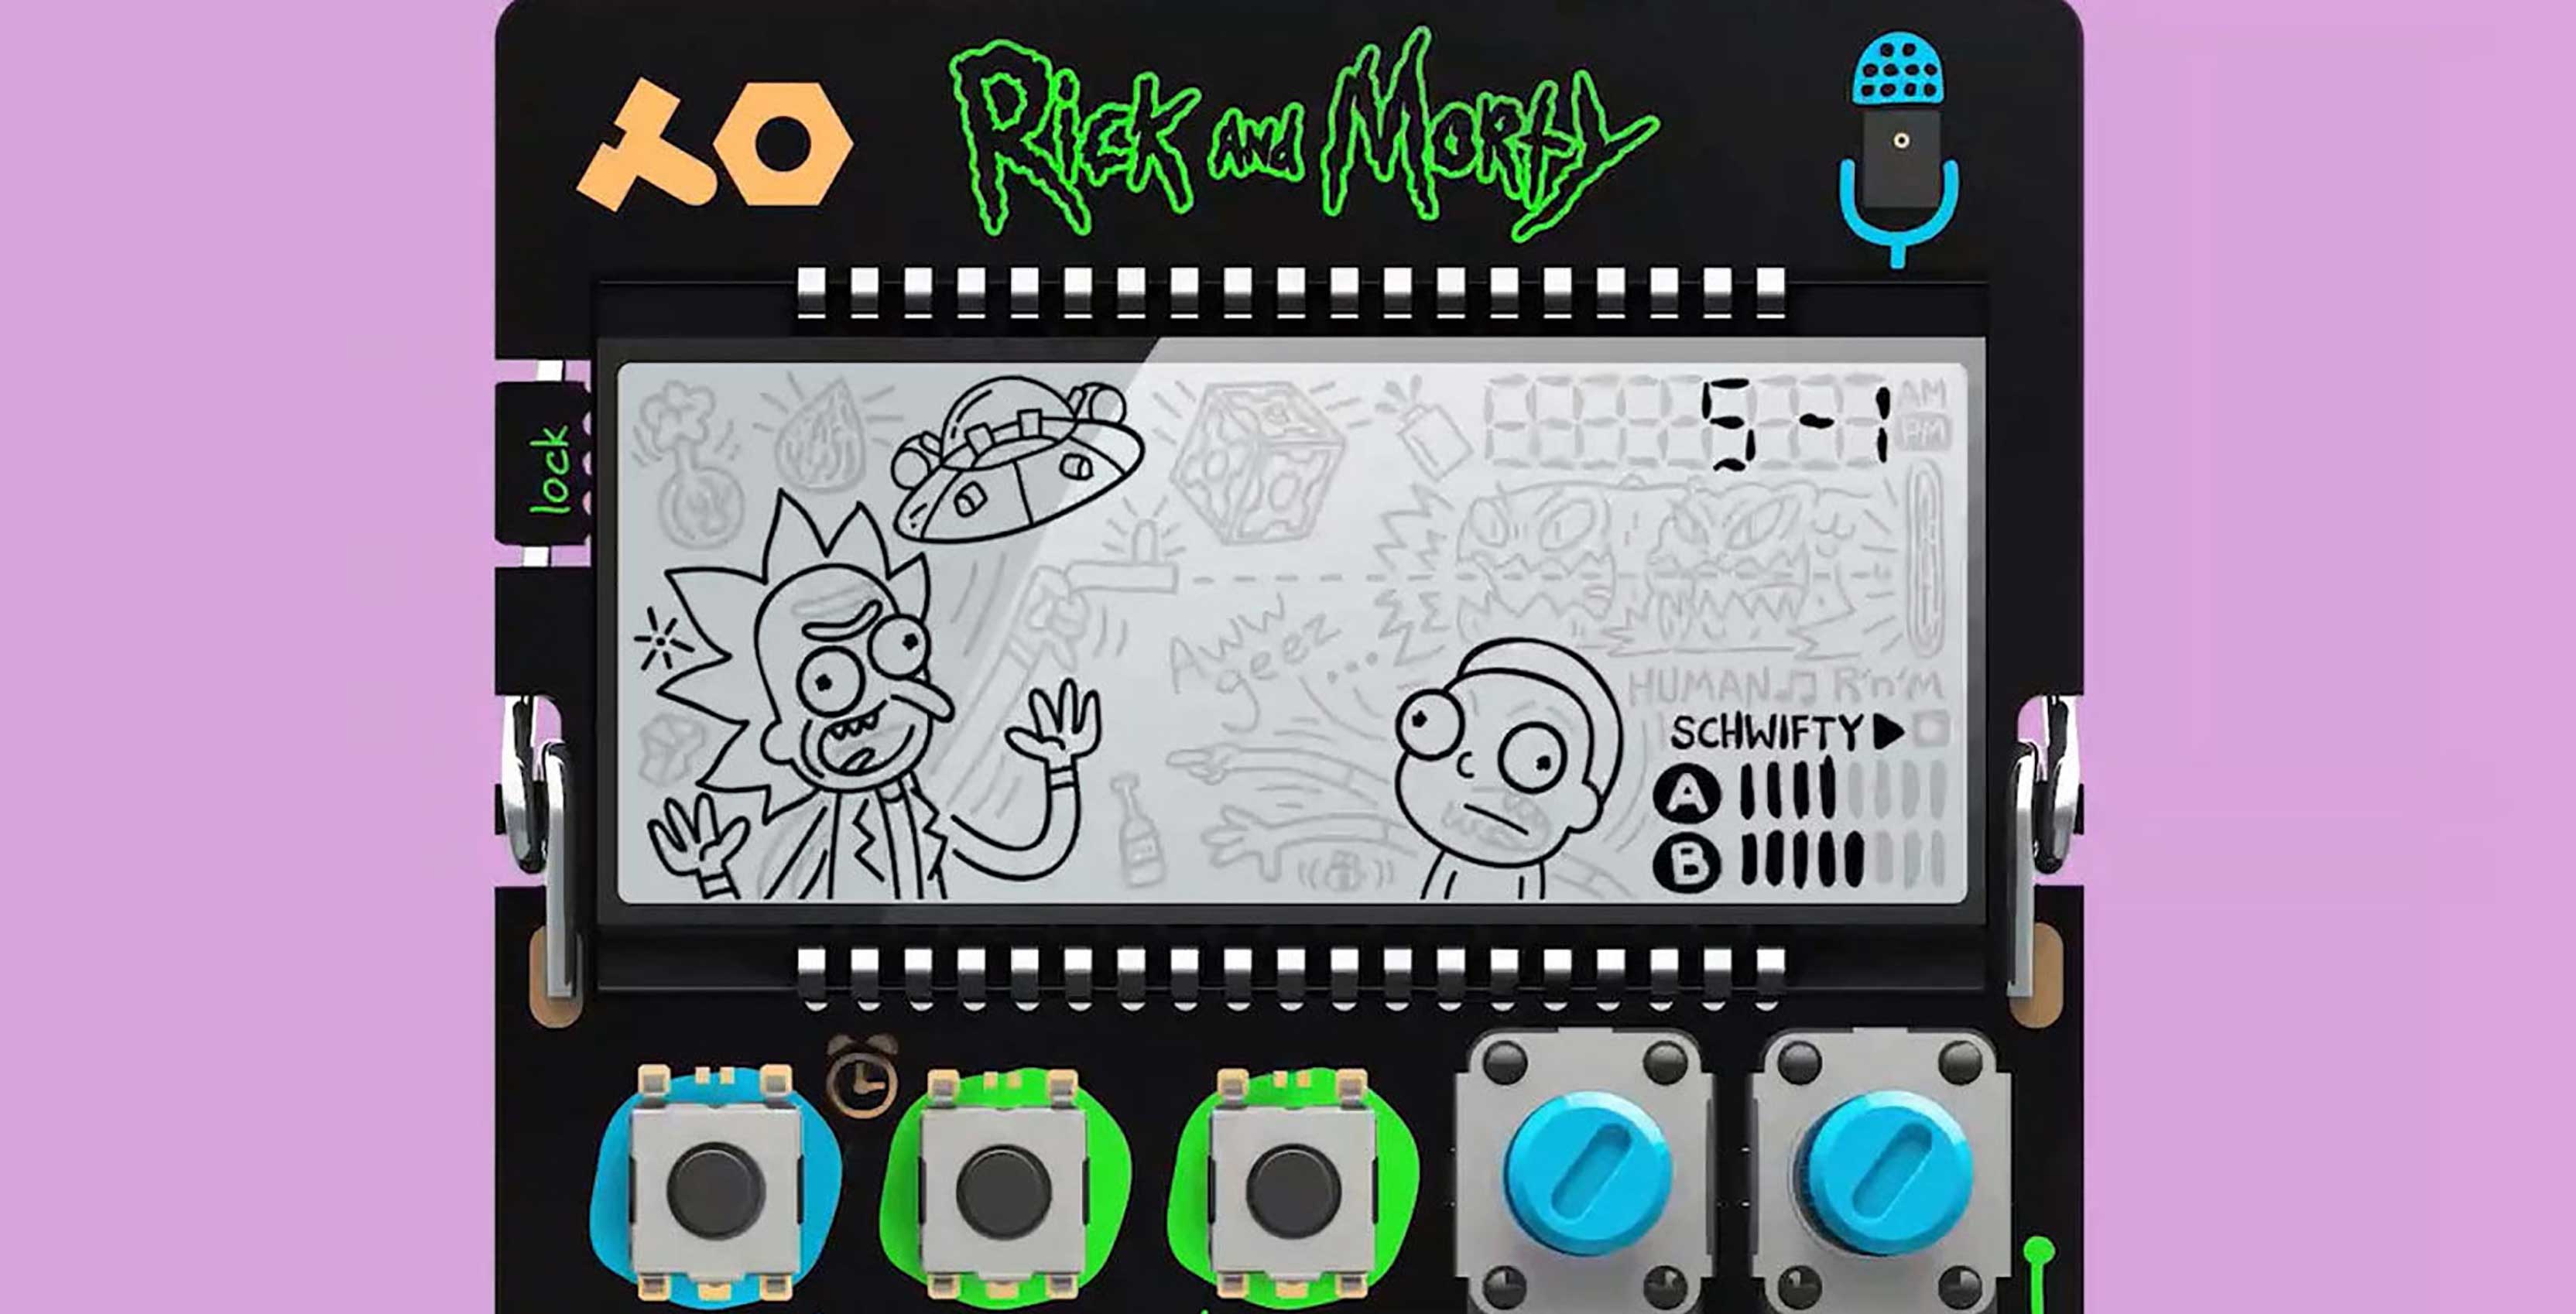 Rick and Morty vocal synthesizer